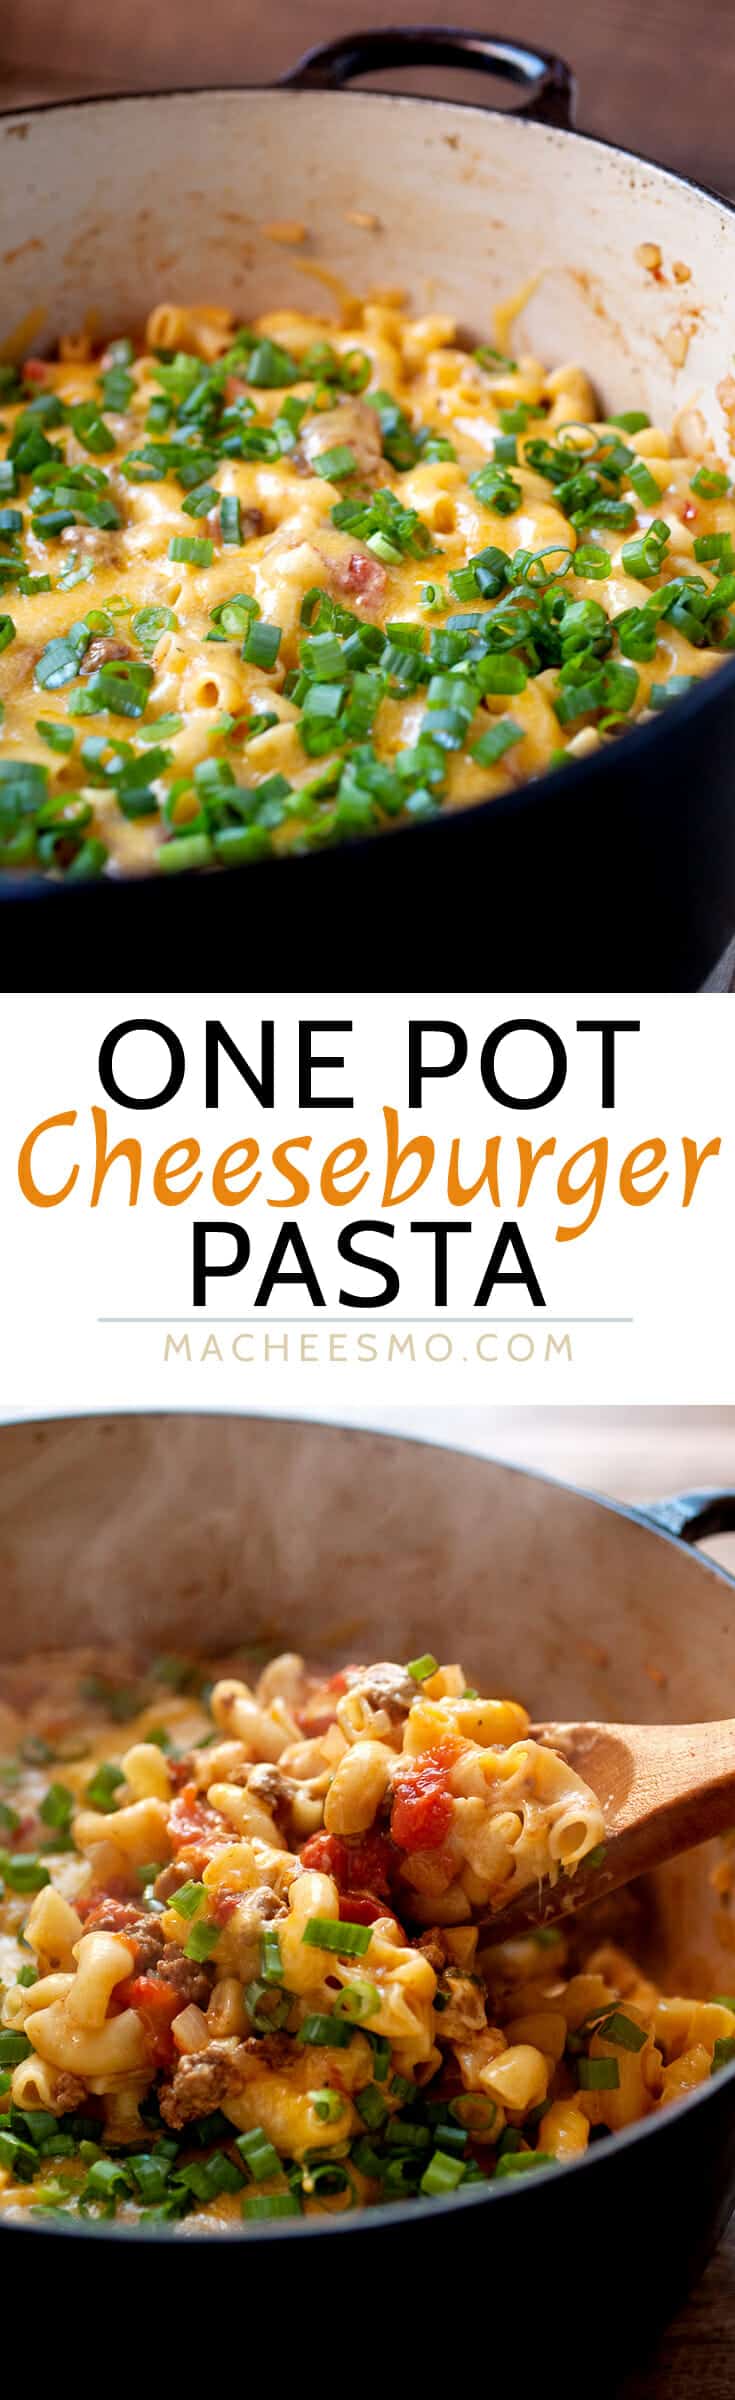 One Pot Cheeseburger Pasta: Everything cooked in one pot: beef, onions, and pasta! Some say it's impossible, but this is the way to make it happen! Plus, a nice little lid of cheddar cheese on top finishes off this pasta dish and makes it very worth your while. DIG IN. | macheesmo.com